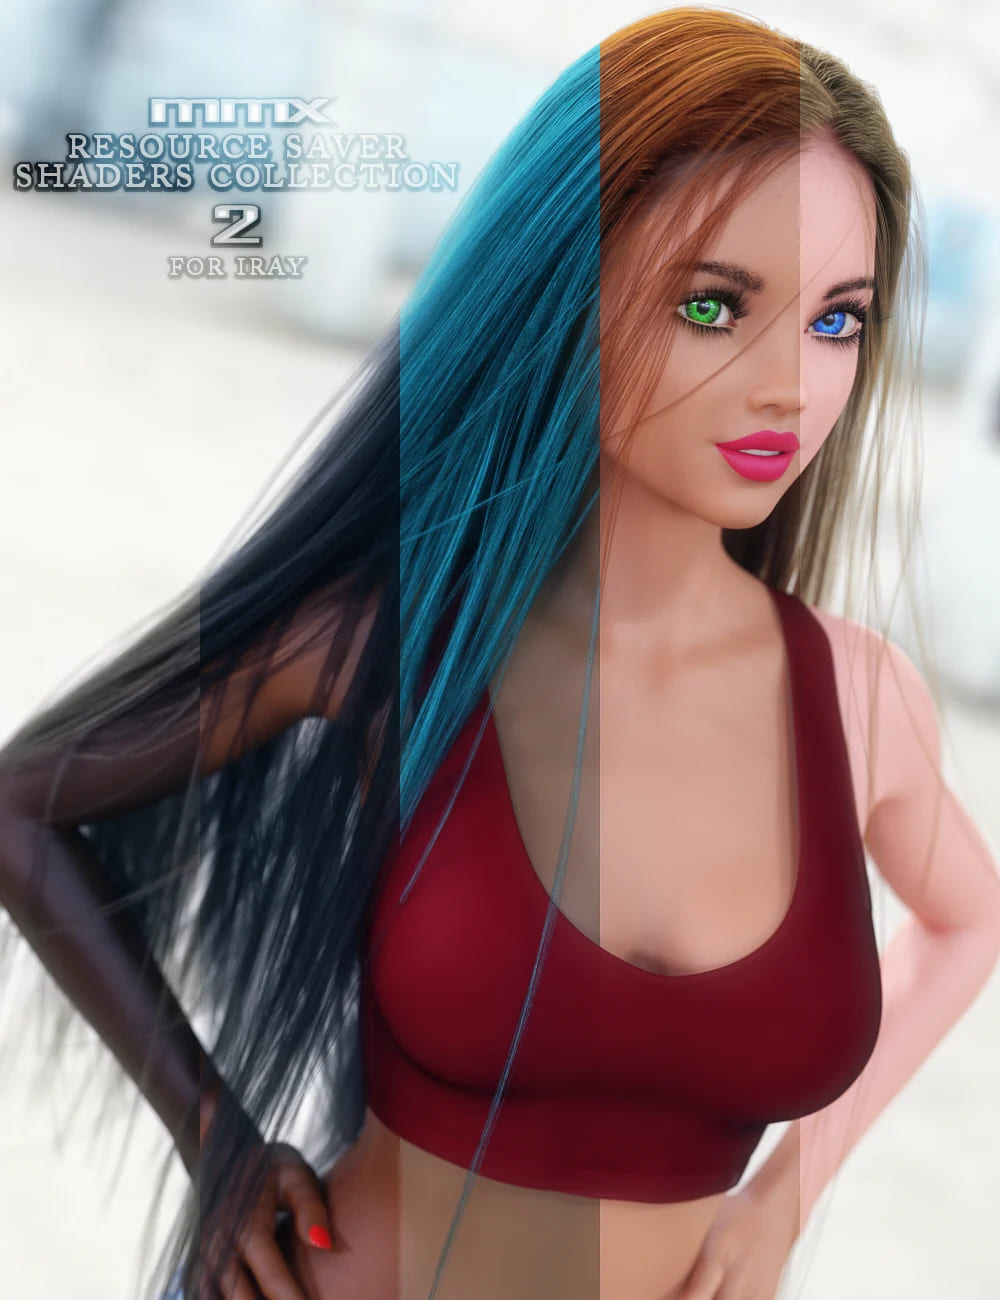 MMX Resource Saver Shaders Collection 2 for Iray_DAZ3D下载站